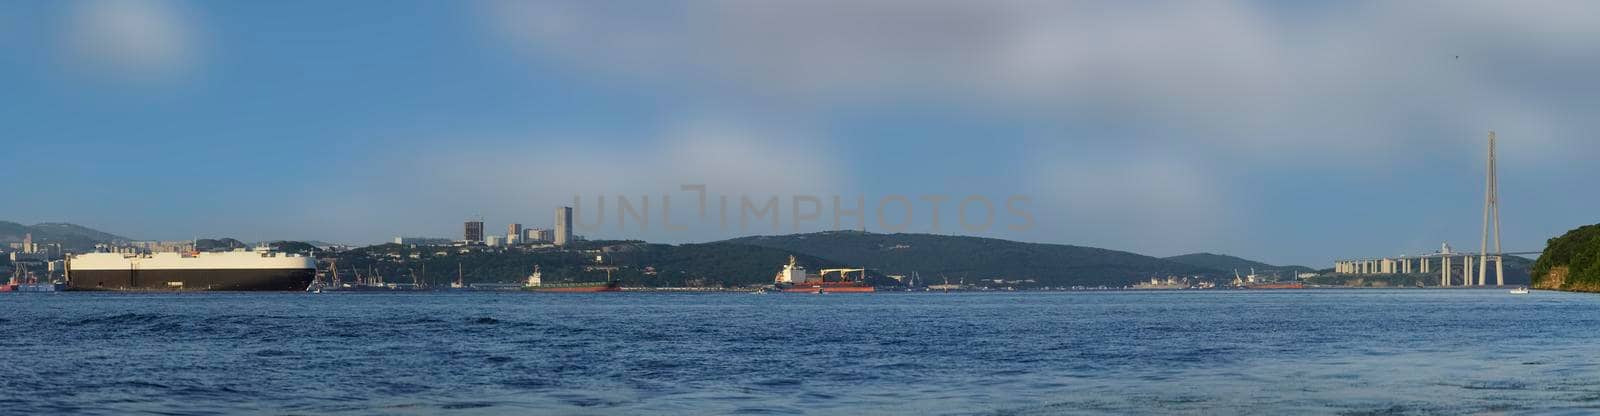 Vladivostok, Russia. Panorama of the sea landscape with the Russian bridge and ships